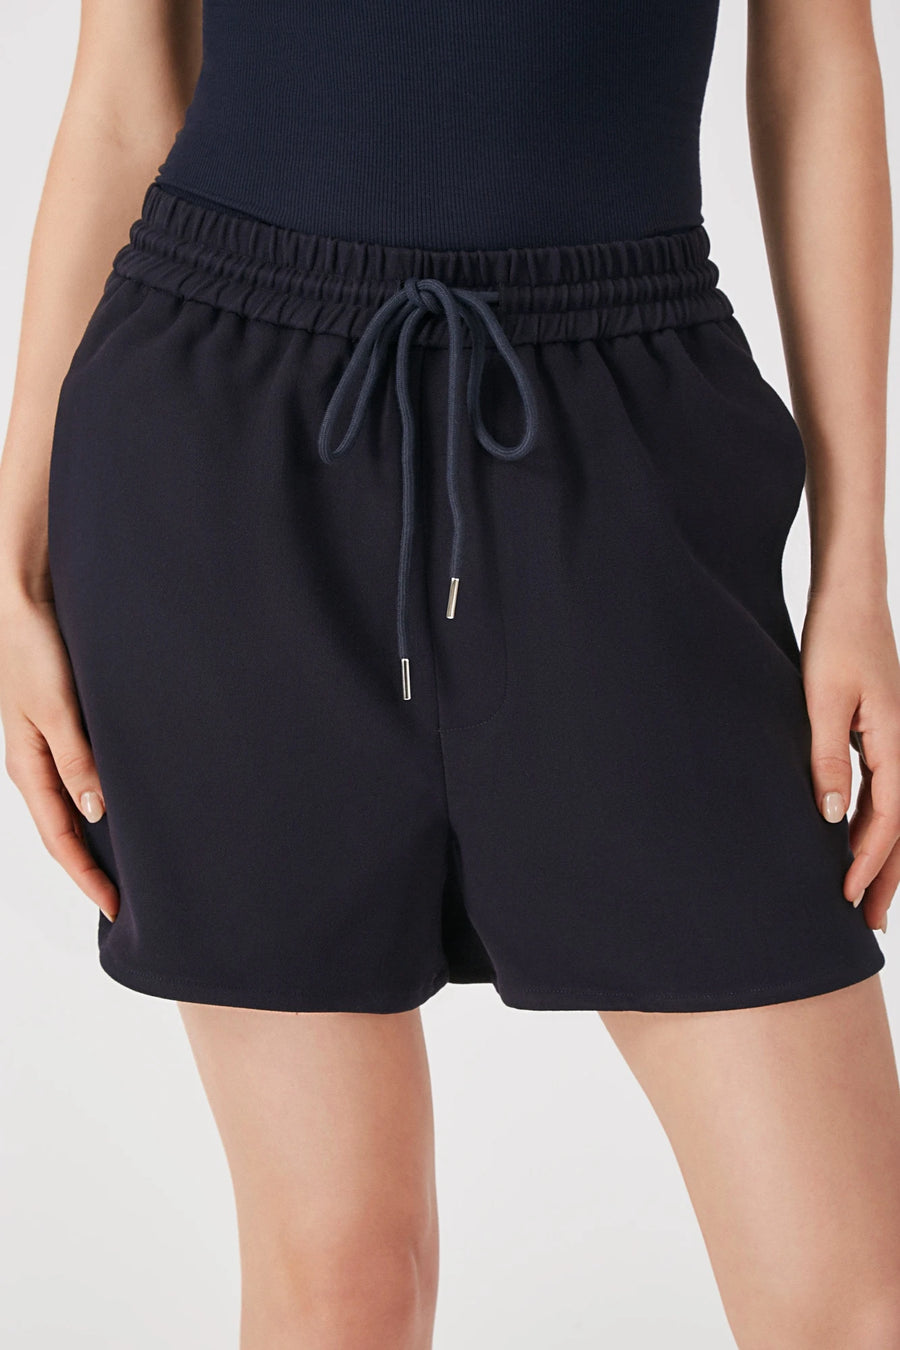 The Mathewson jog string shorts in navy by Greyven